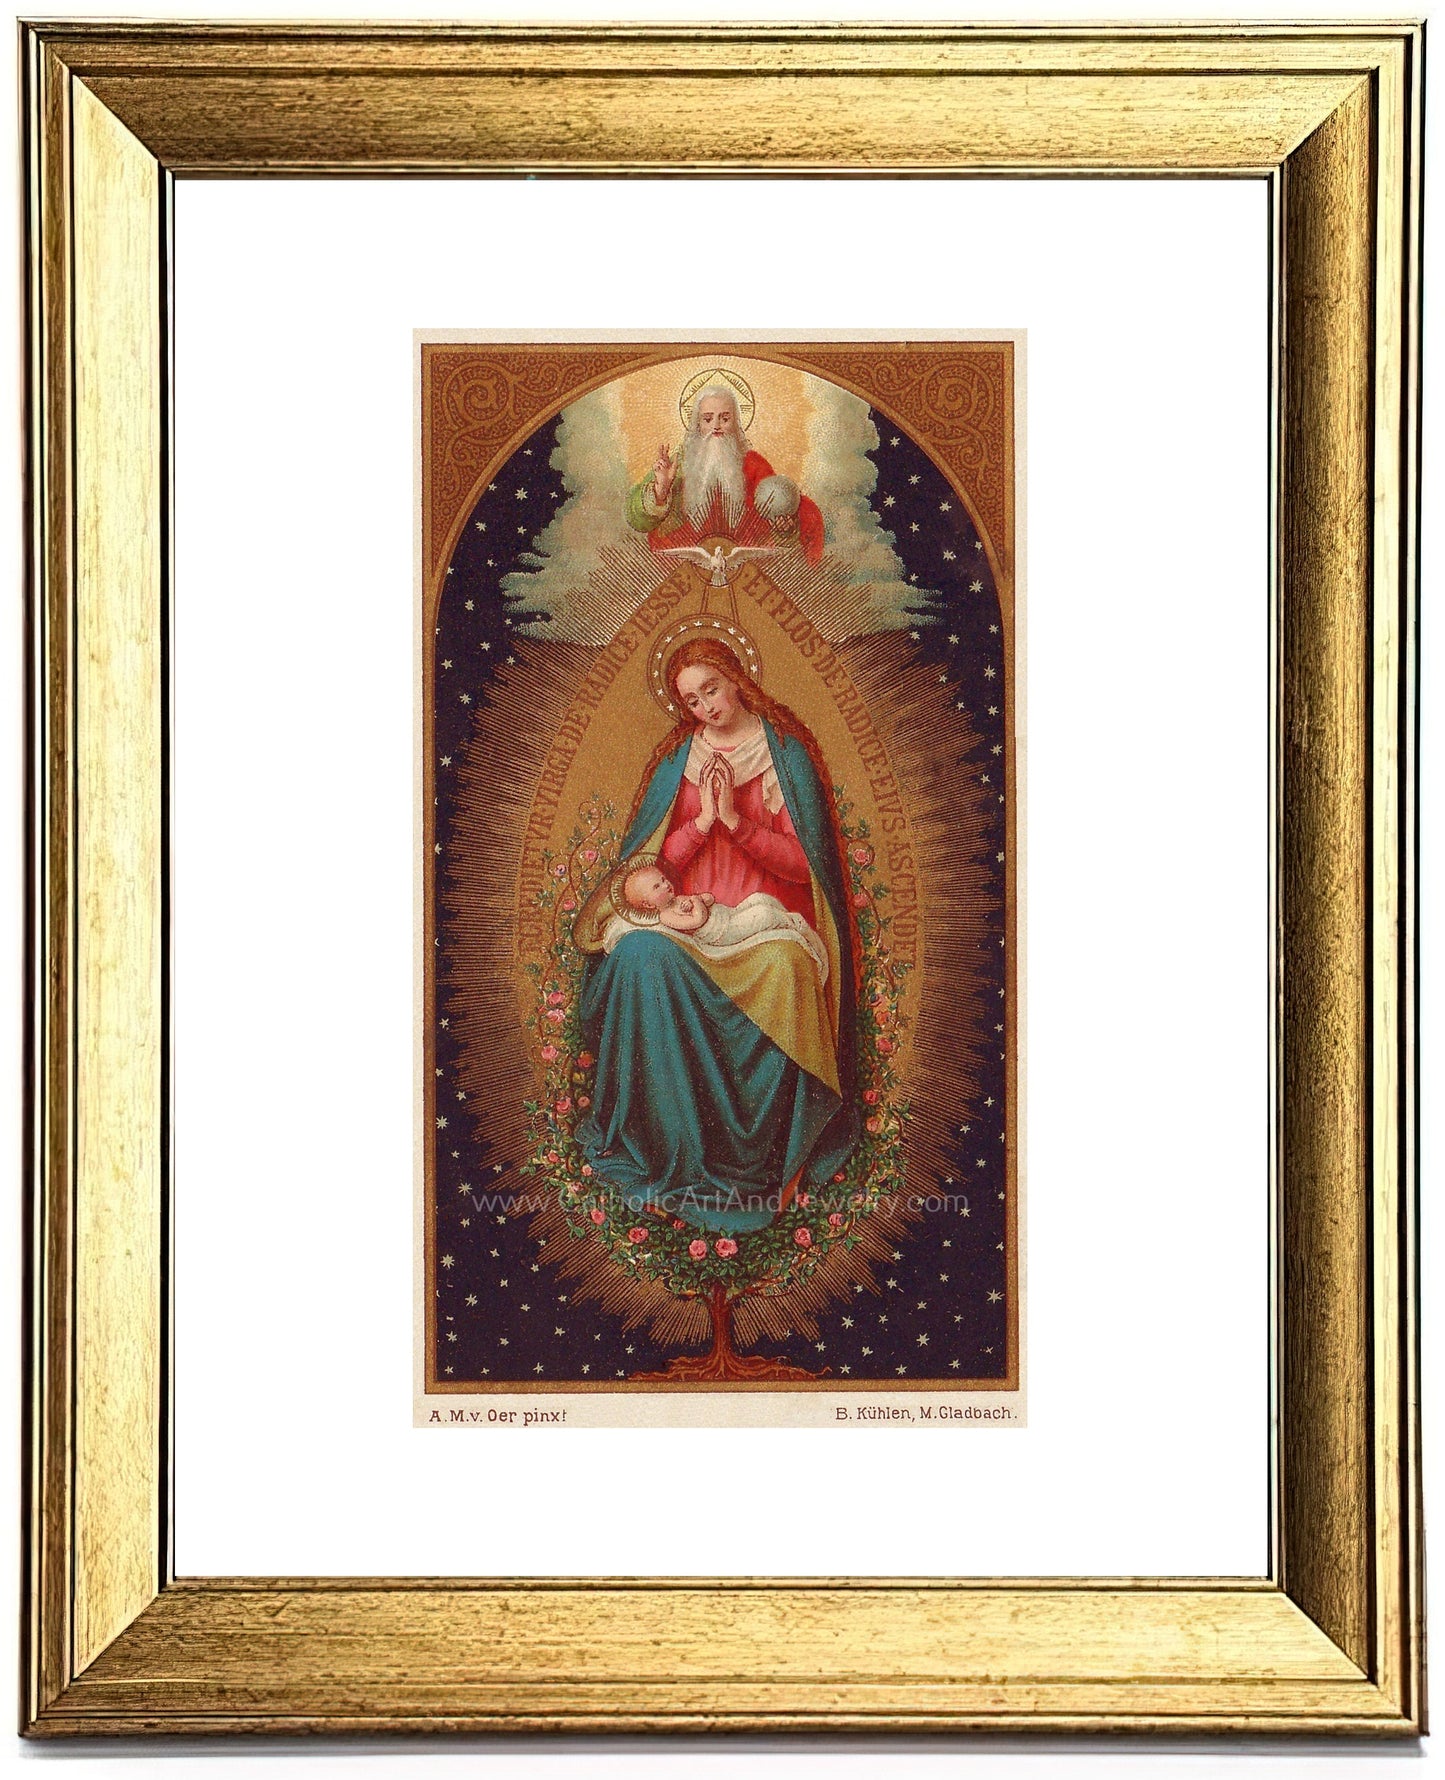 Tree of Jesse with Mary and Jesus – based on a Vintage Holy Card – Catholic Art Print – Madonna and Child